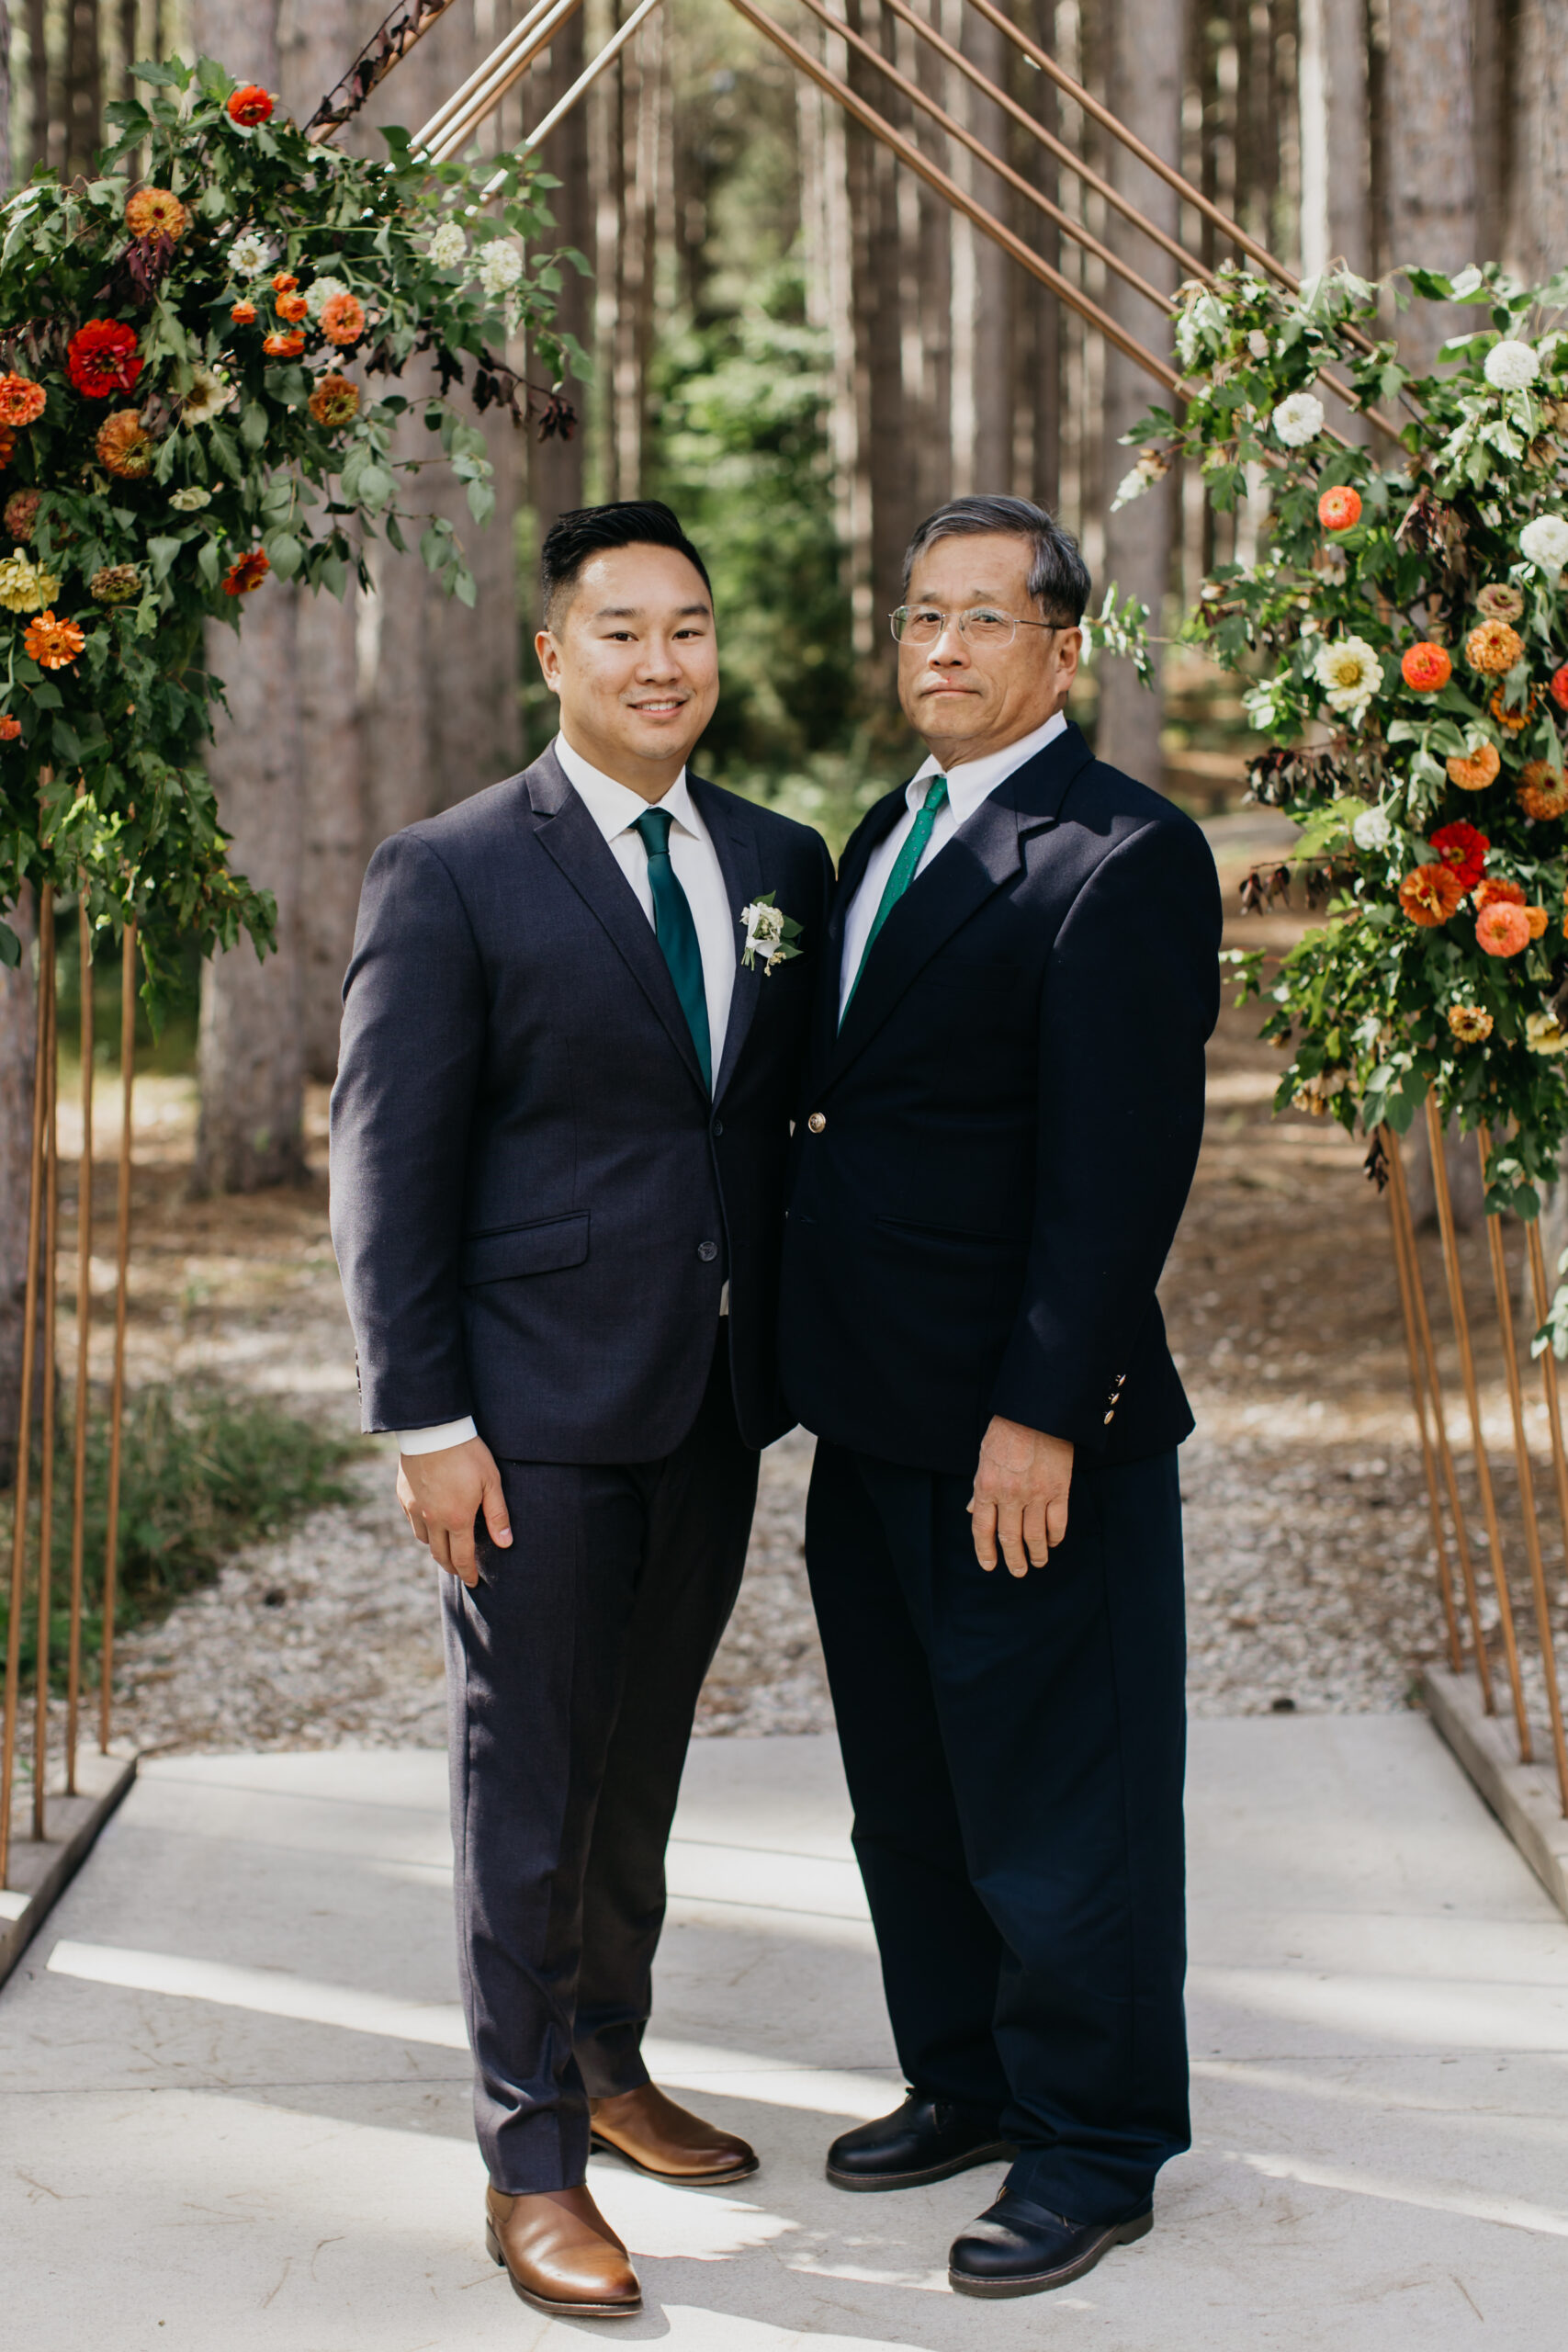 A photo of the groom and his father during the wedding ceremony